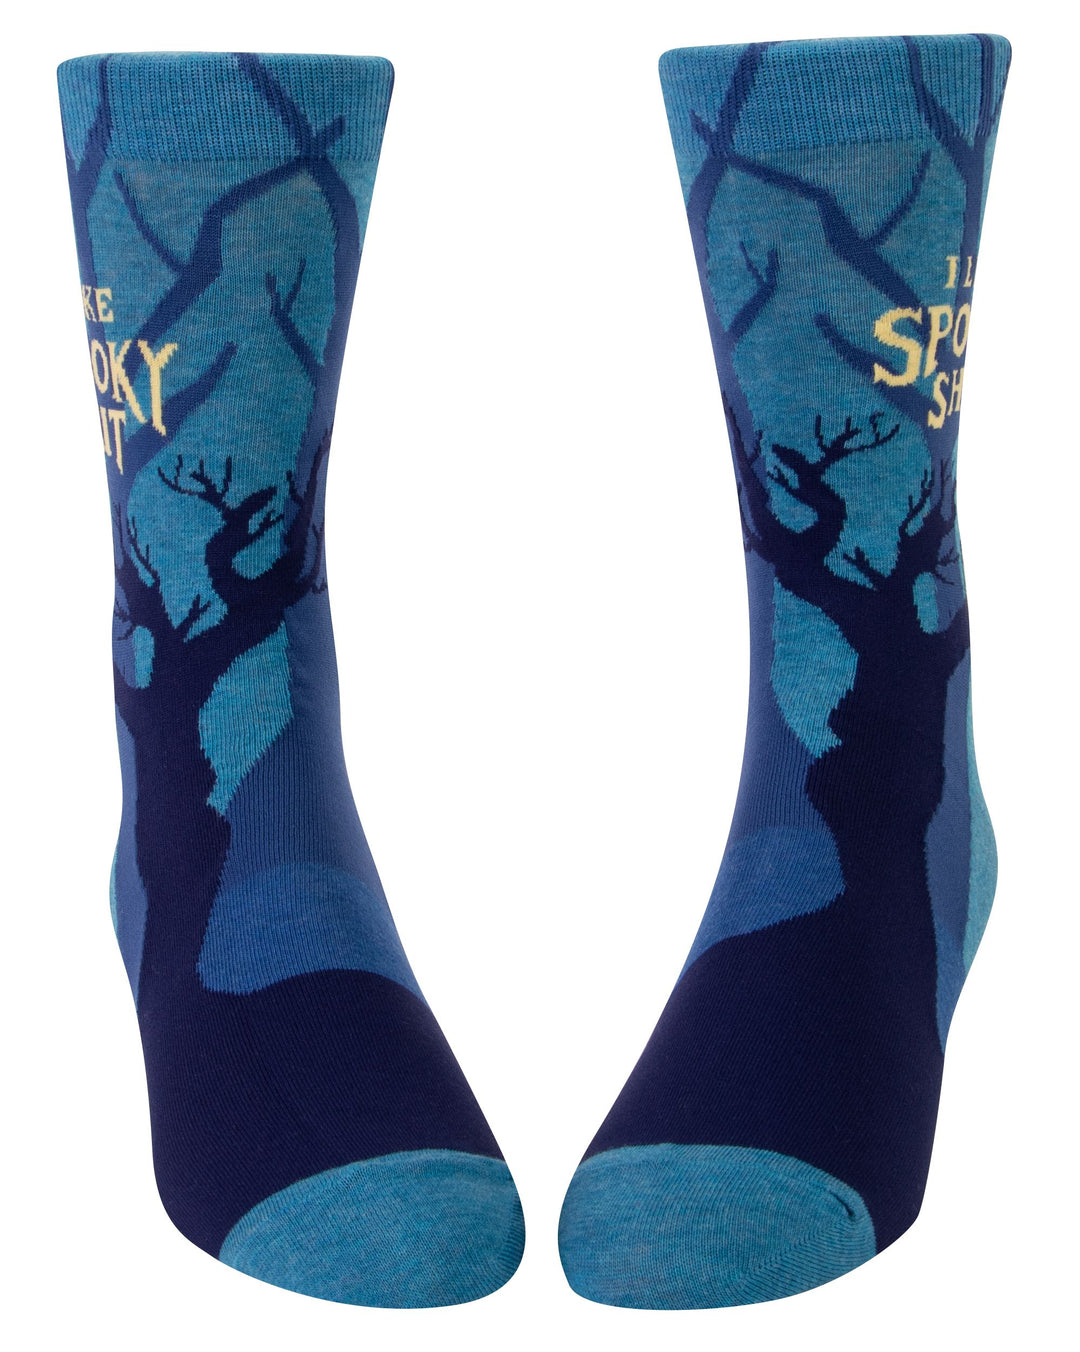 I LIKE SPOOKY SHIT CREW SOCKS - Kingfisher Road - Online Boutique